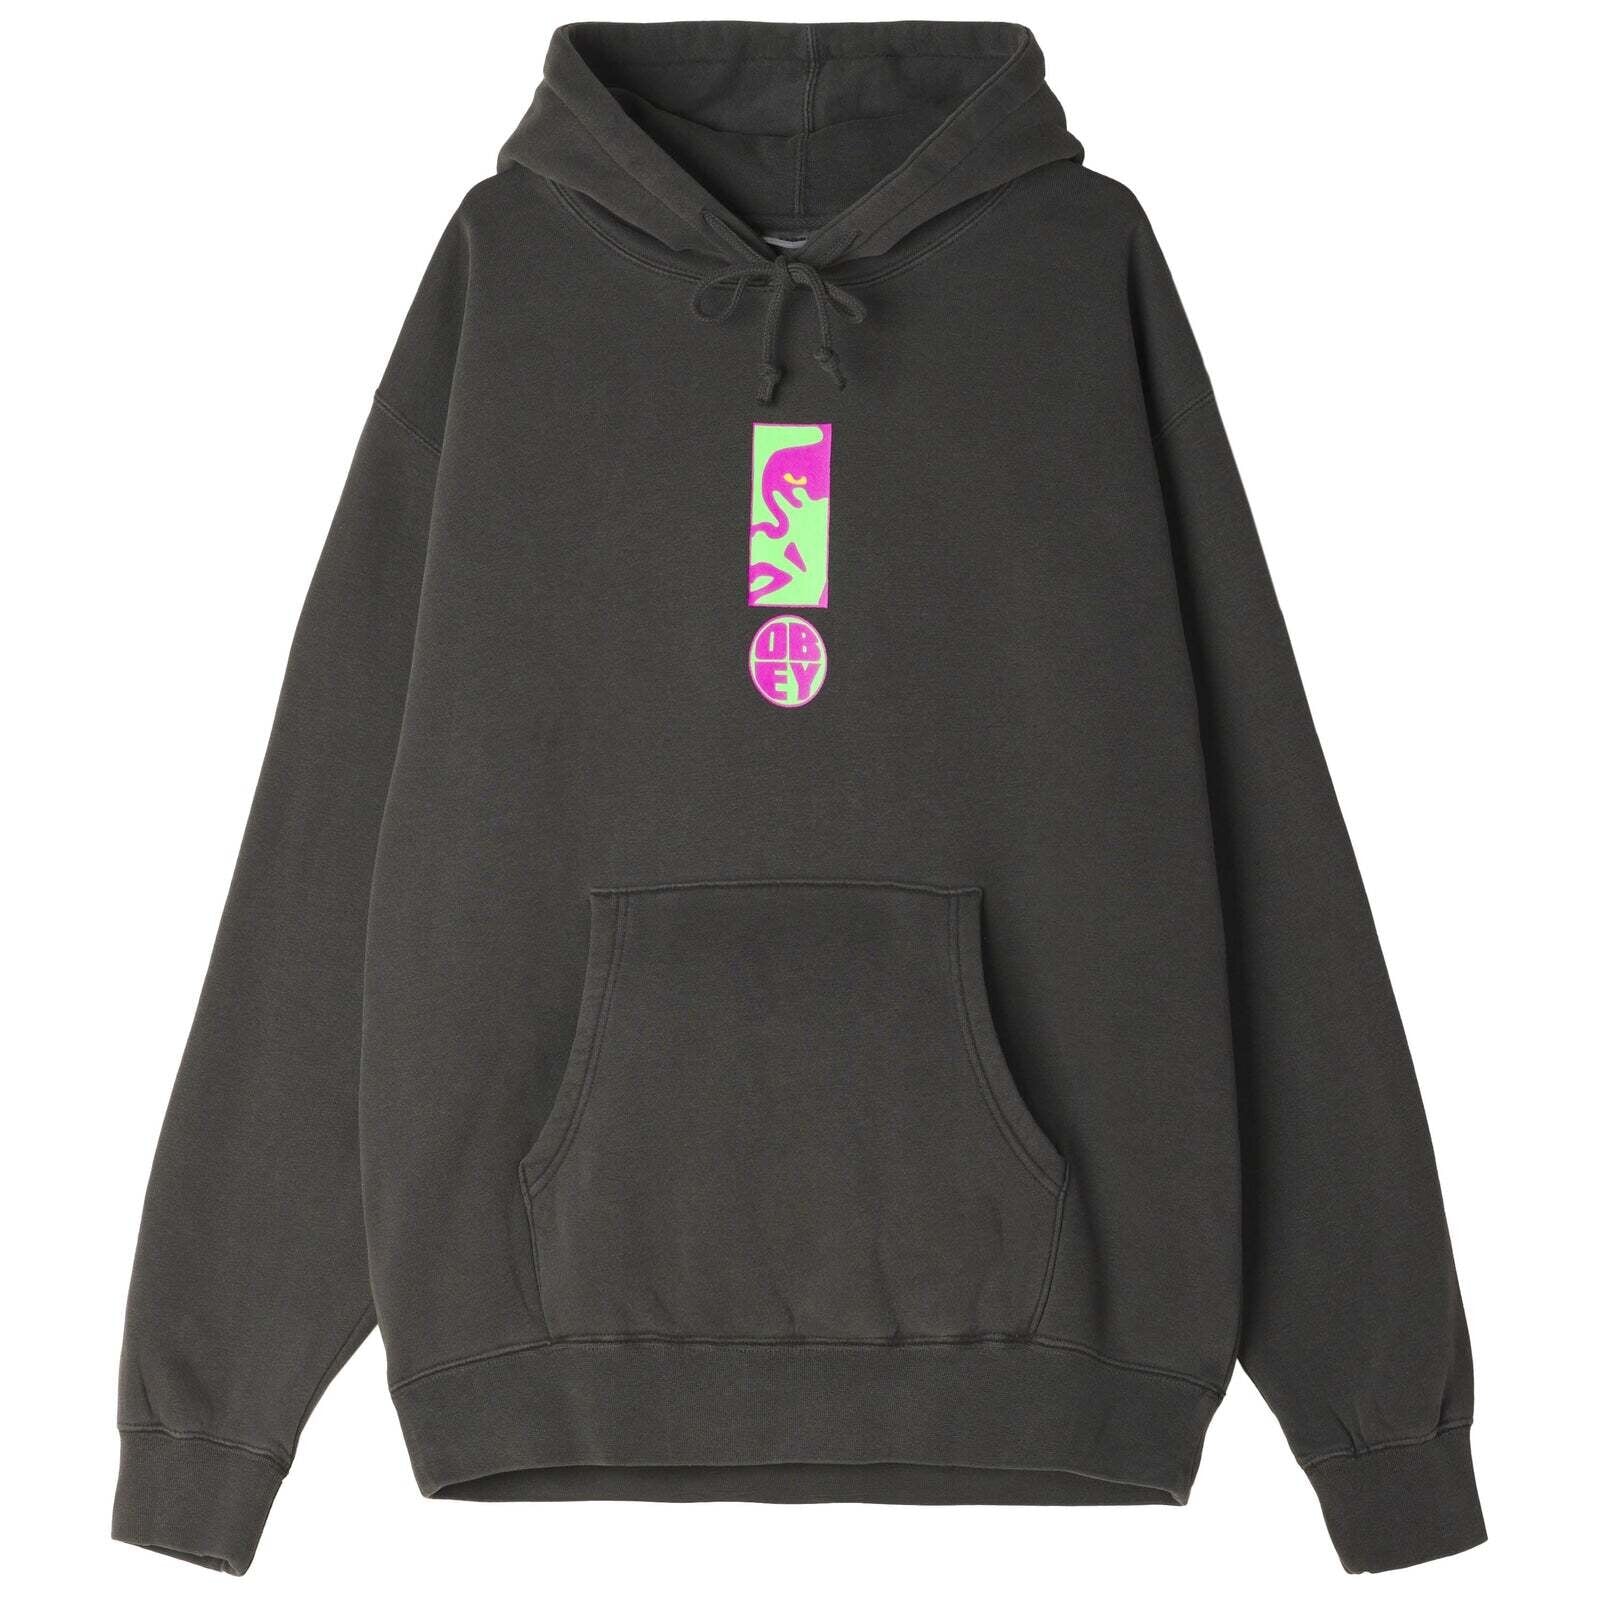 Obey Exclamation Obey Heavyweight Pullover Hoodie